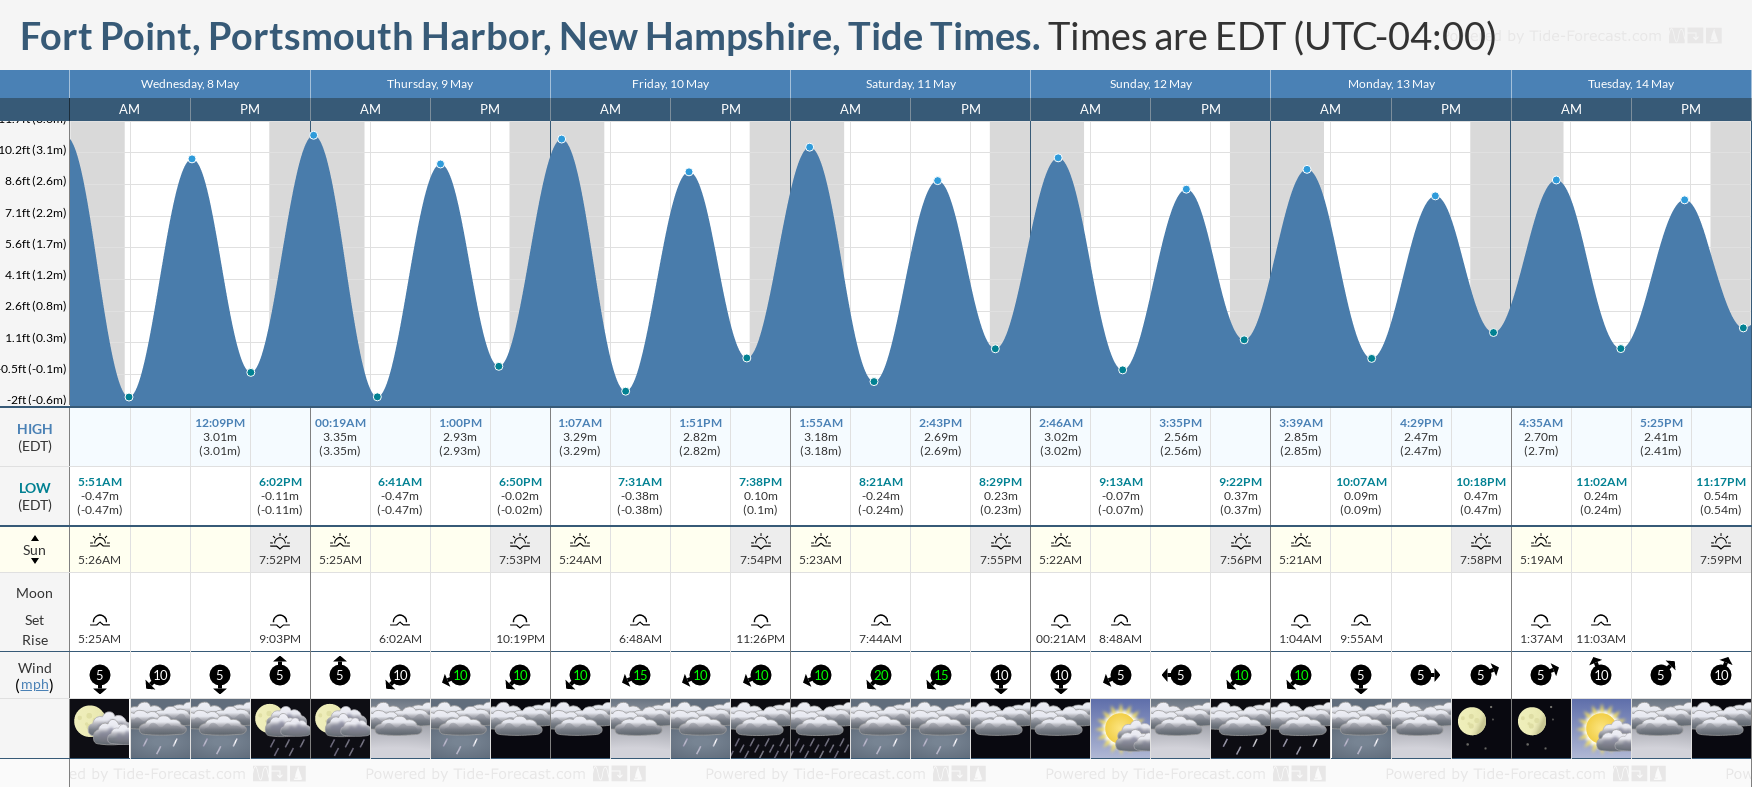 Fort Point, Portsmouth Harbor, New Hampshire Tide Chart including high and low tide times for the next 7 days